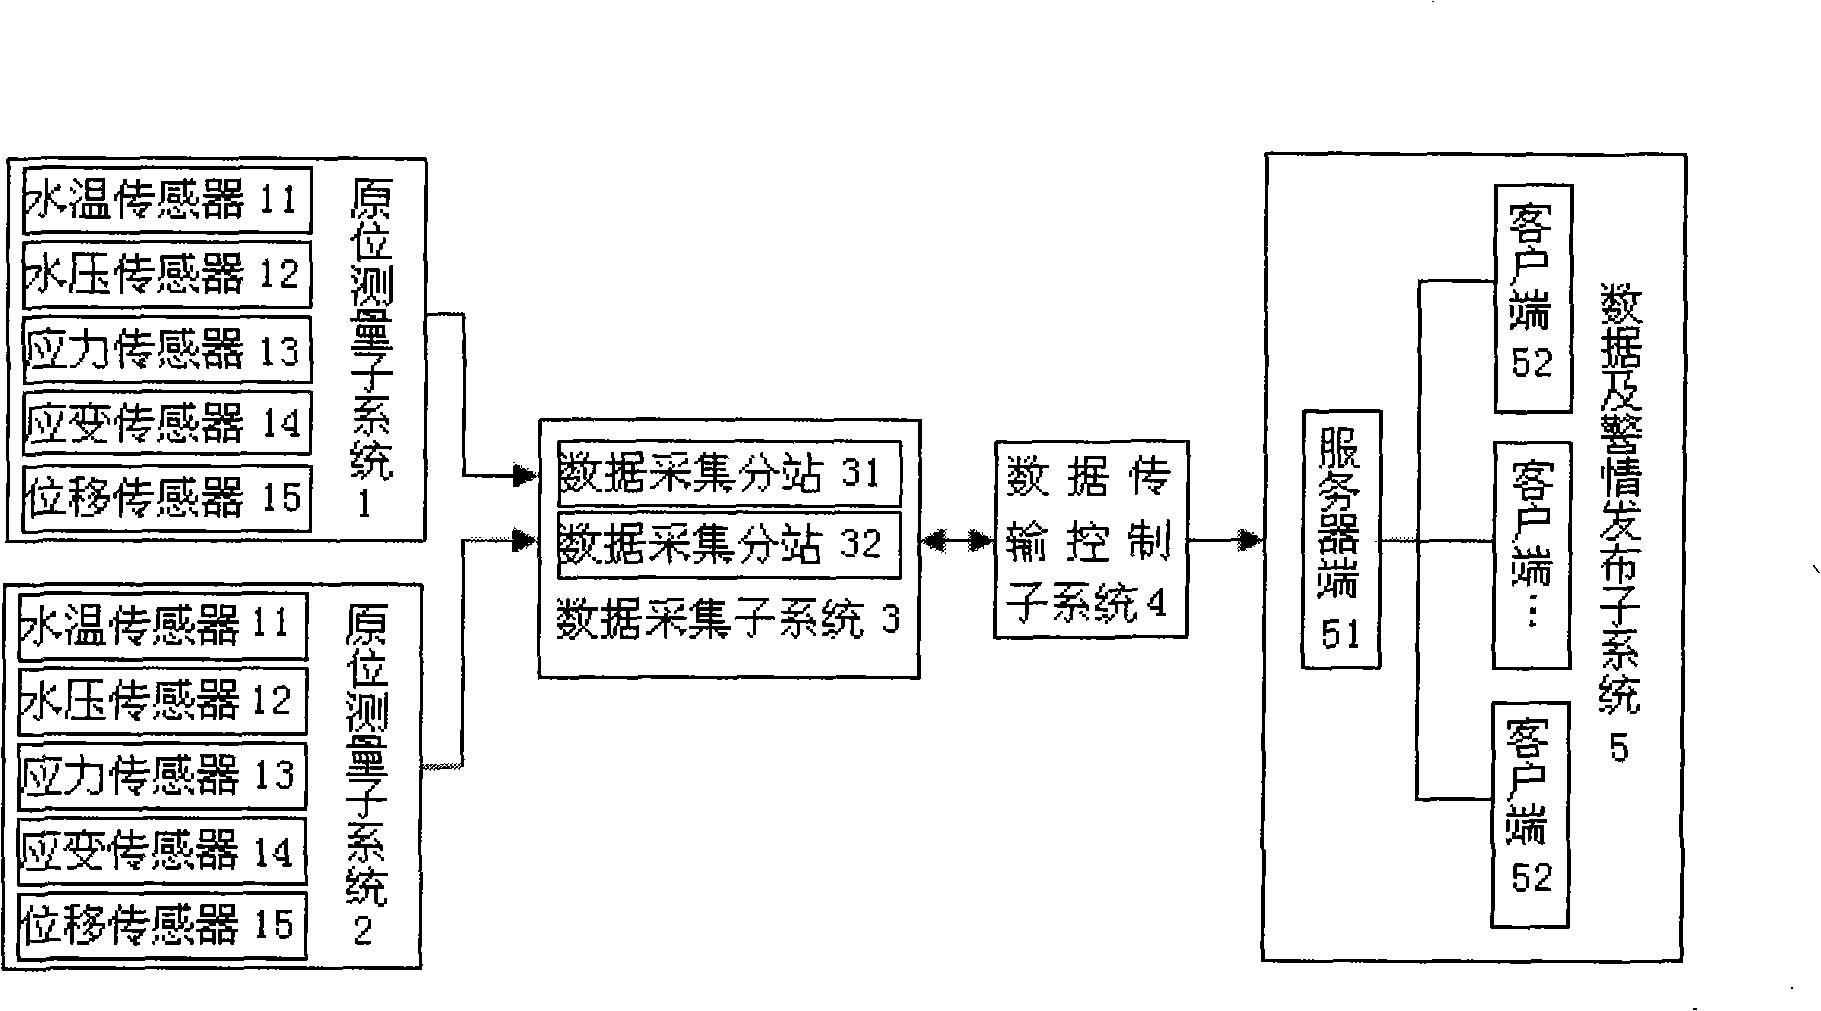 Mine water bursting disaster monitoring and early-warning system and control method thereof